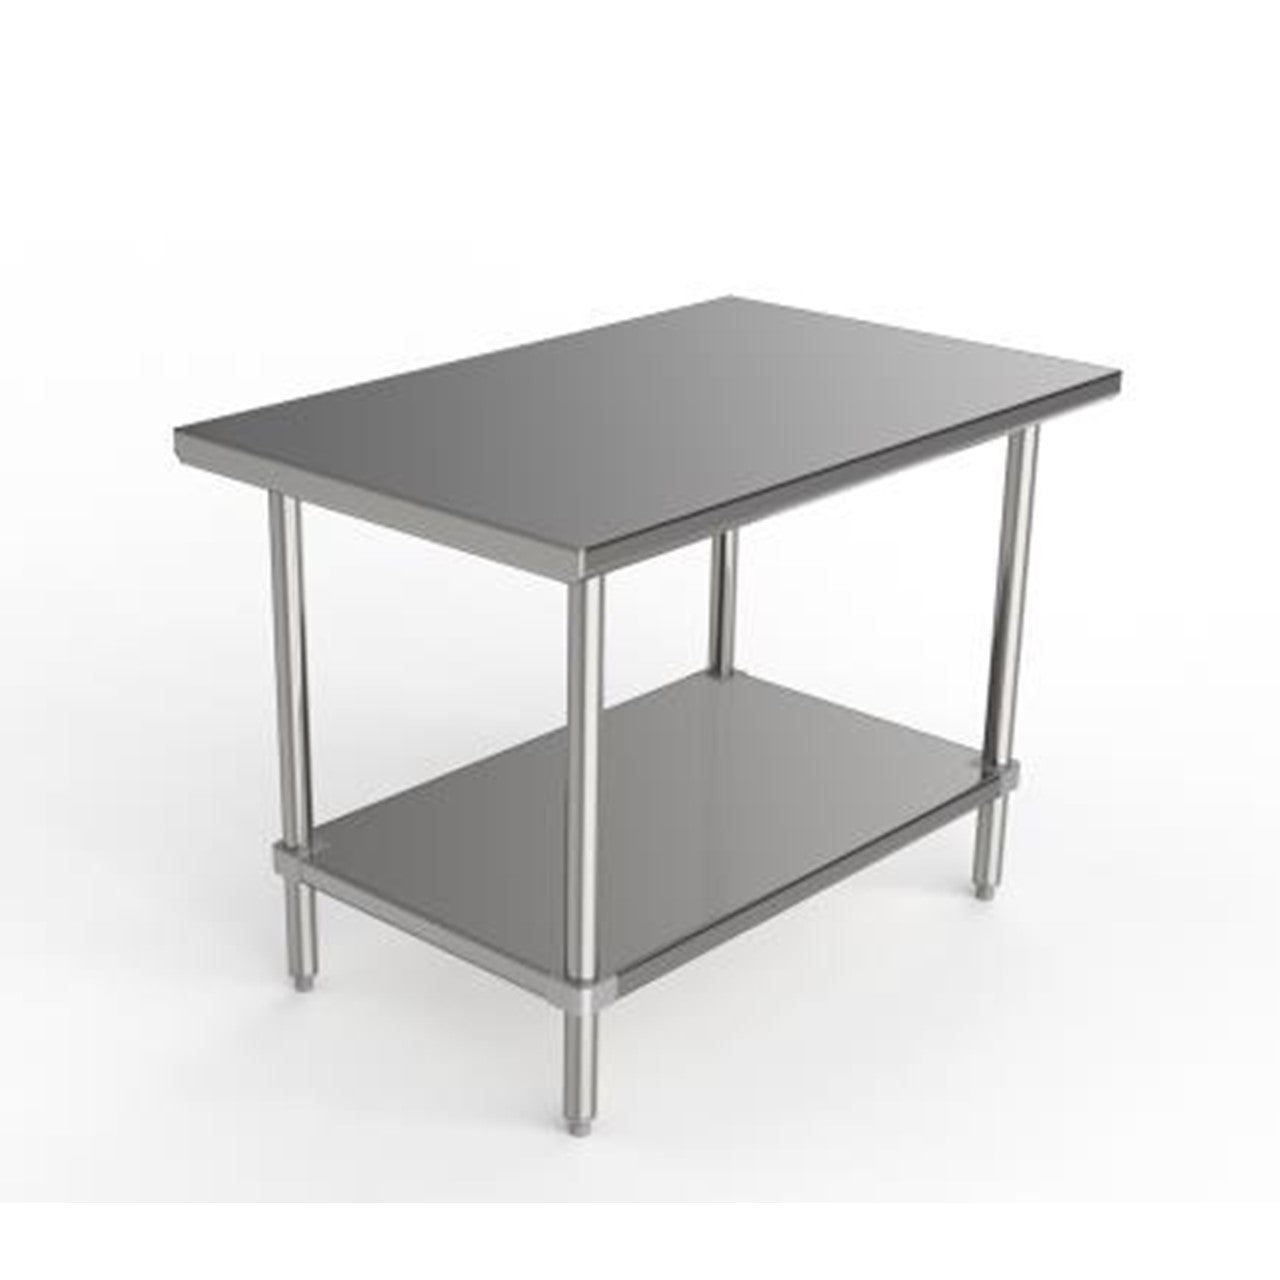 GSW Commercial Grade Flat Top Work Table with Stainless Steel Top, Galvanized Undershelf & Legs, Adjustable Bullet Feet, Perfect for Restaurant, Home, Office, Kitchen or Garage, NSF Approved (24"D x 48"L x 35"H)